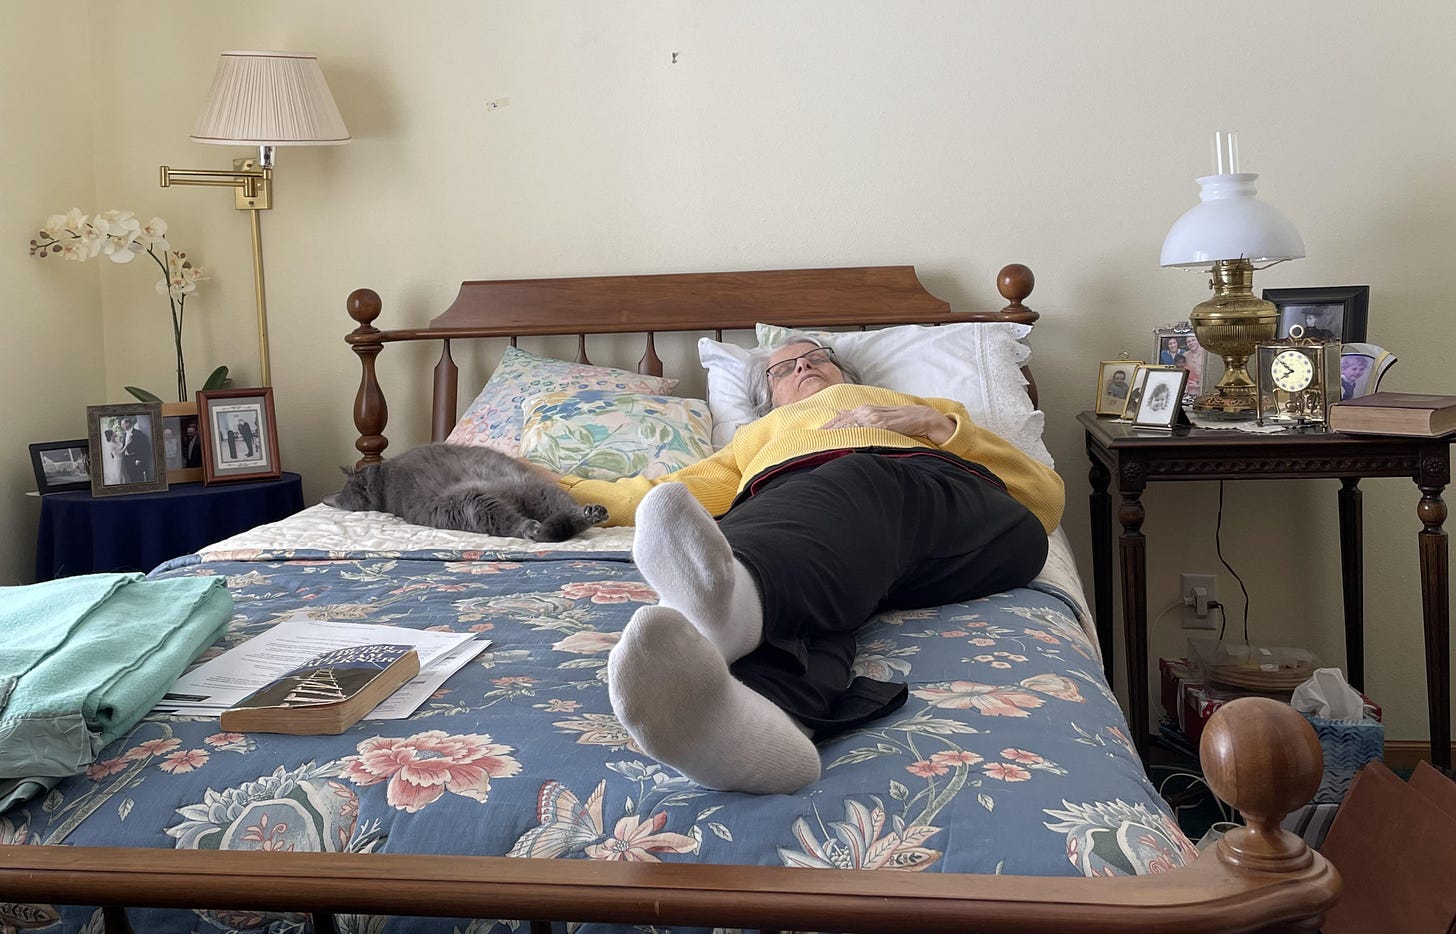 A sleeping senior woman lies on a bed with a sleeping senior catwith 